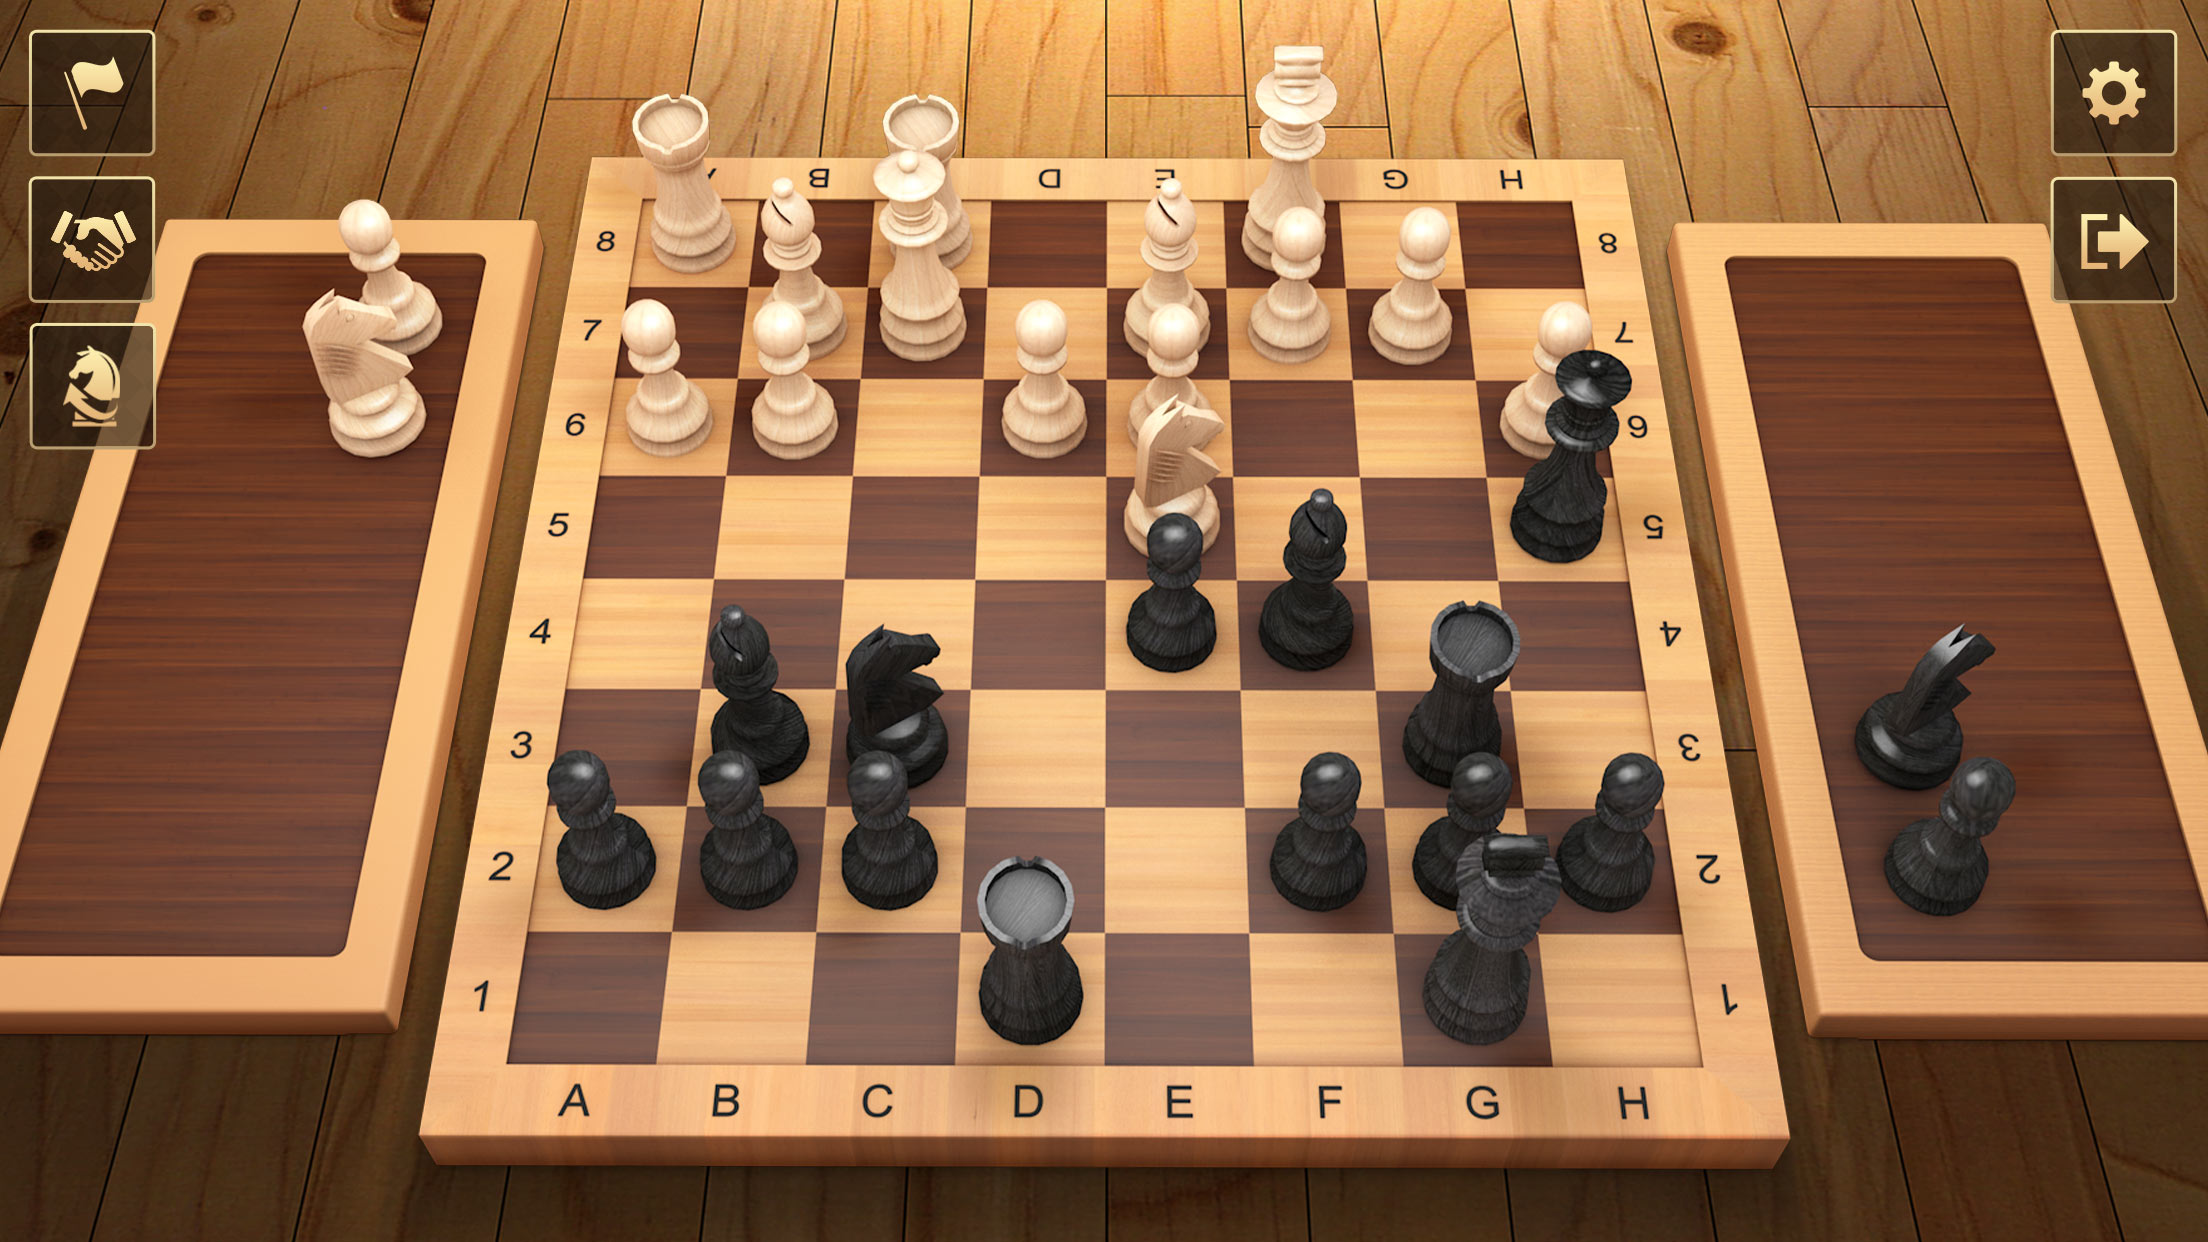 Download Chess android on PC